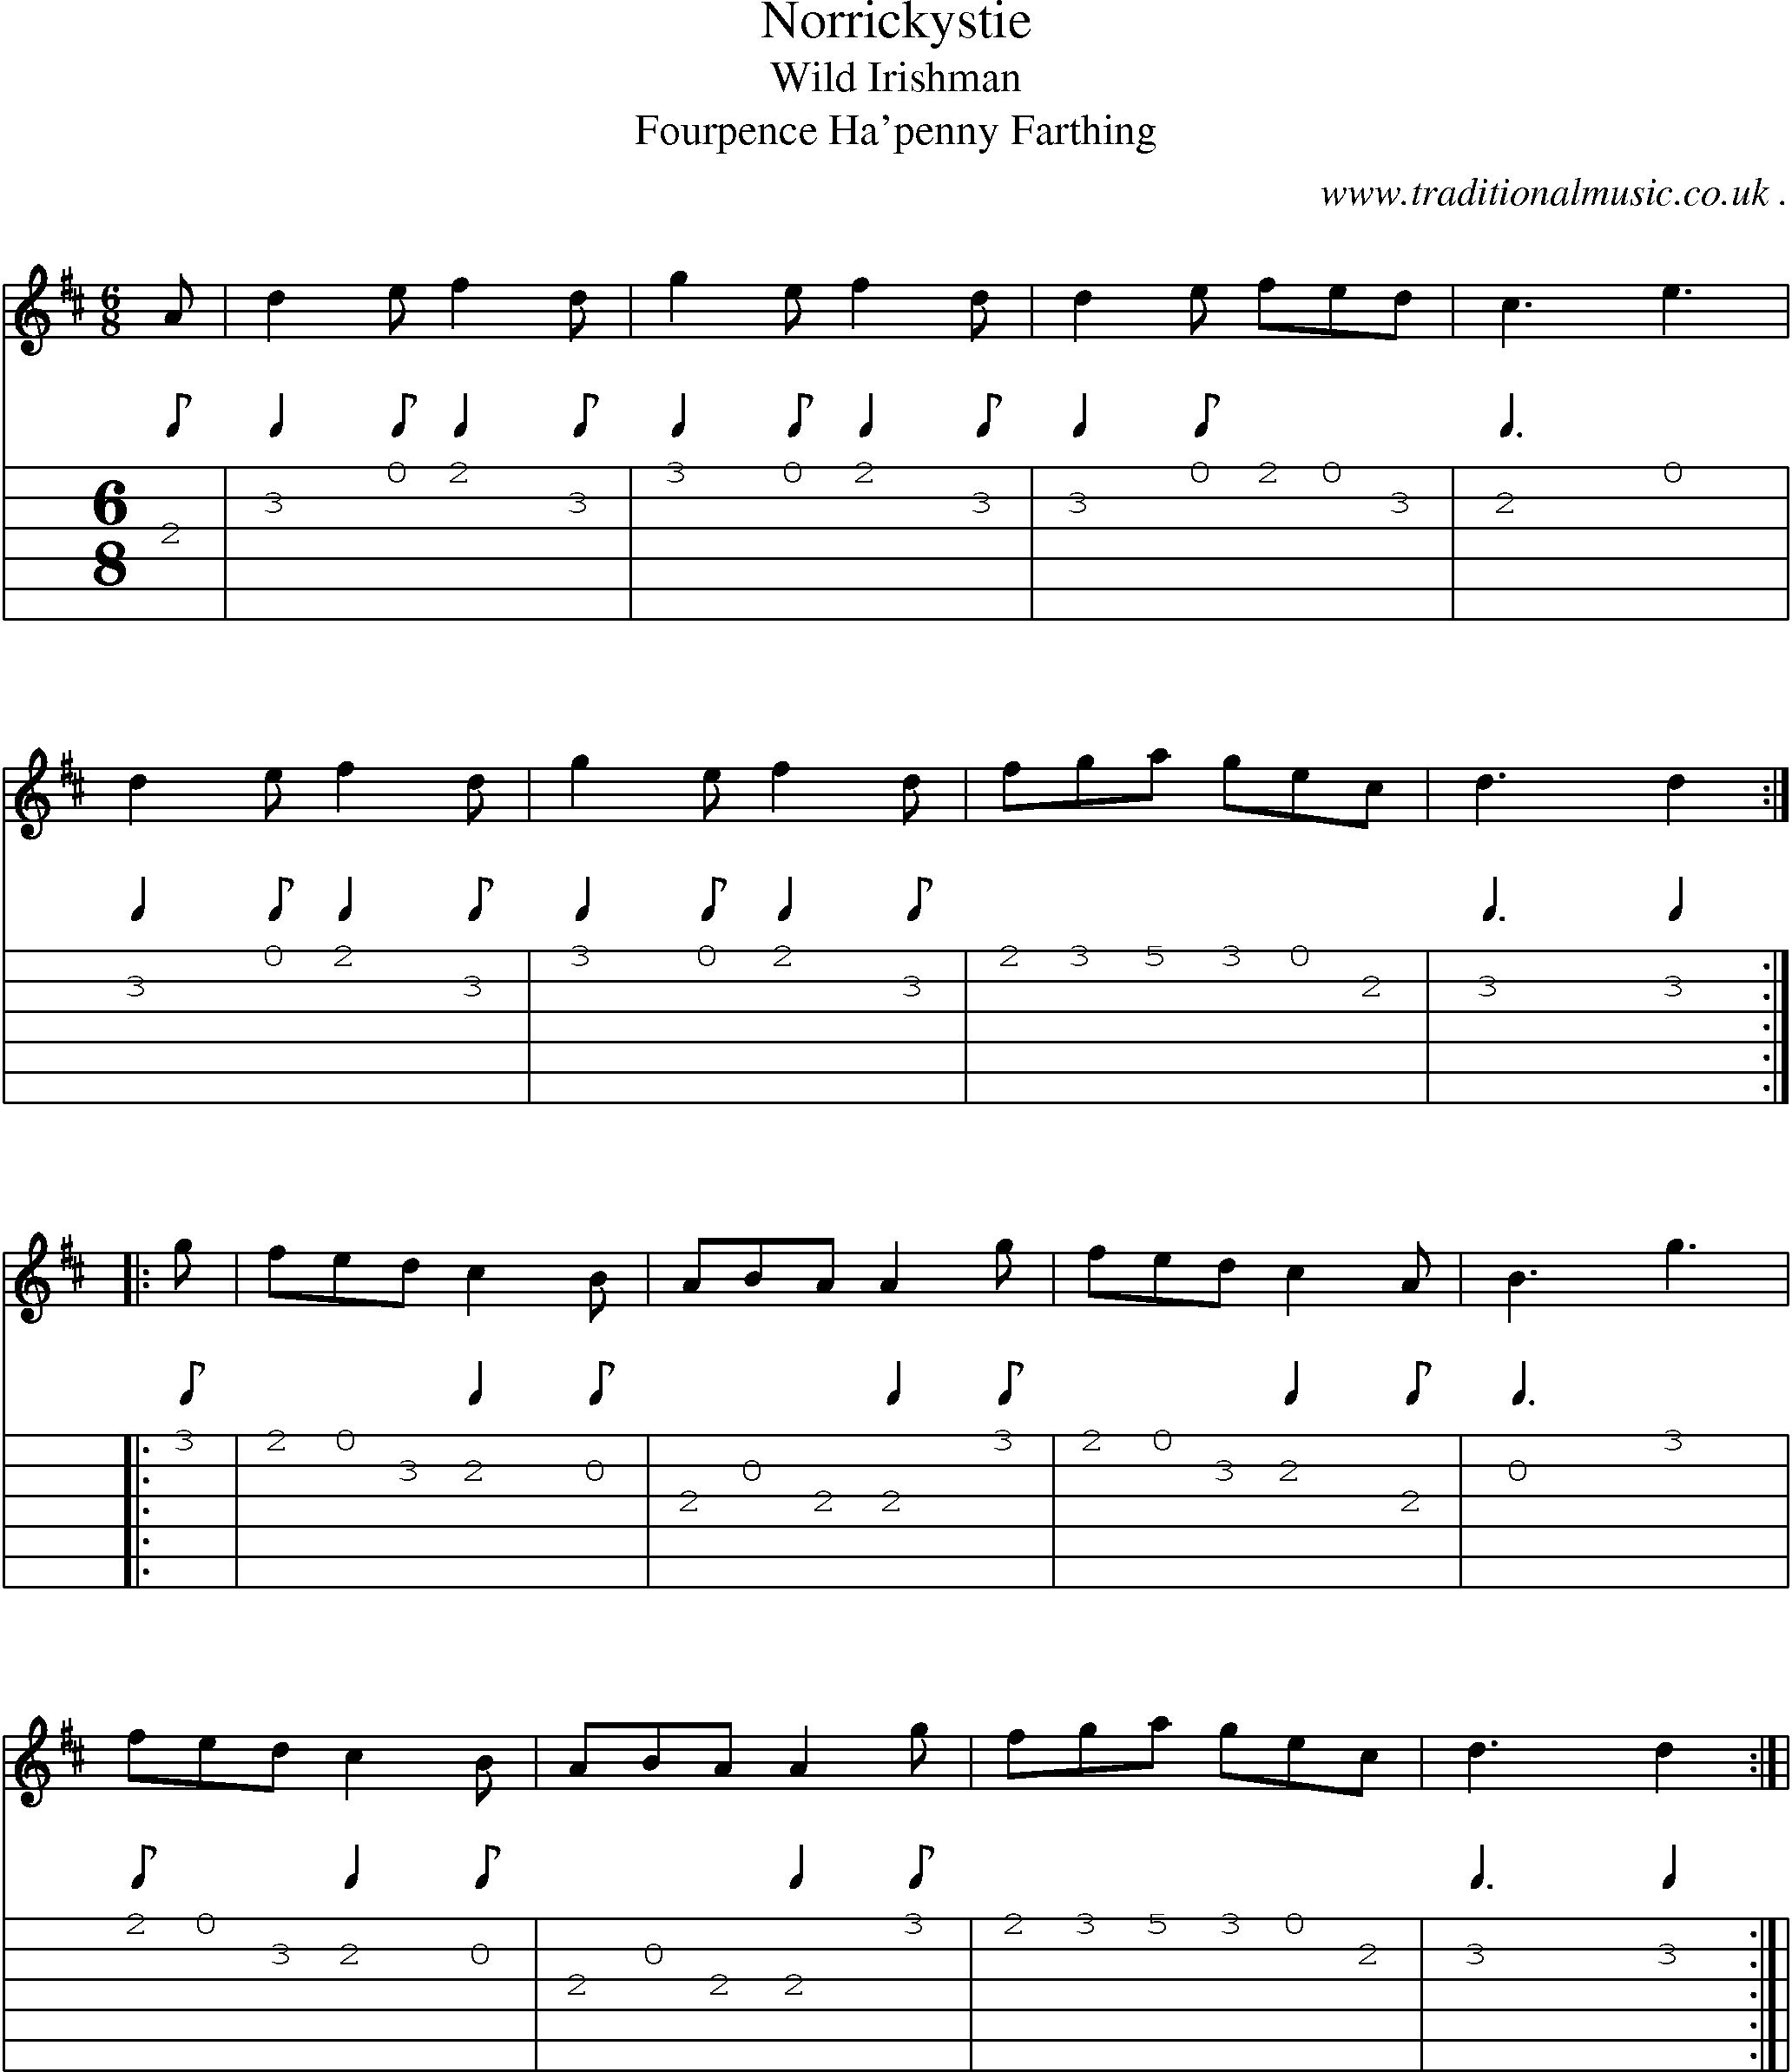 Sheet-Music and Guitar Tabs for Norrickystie